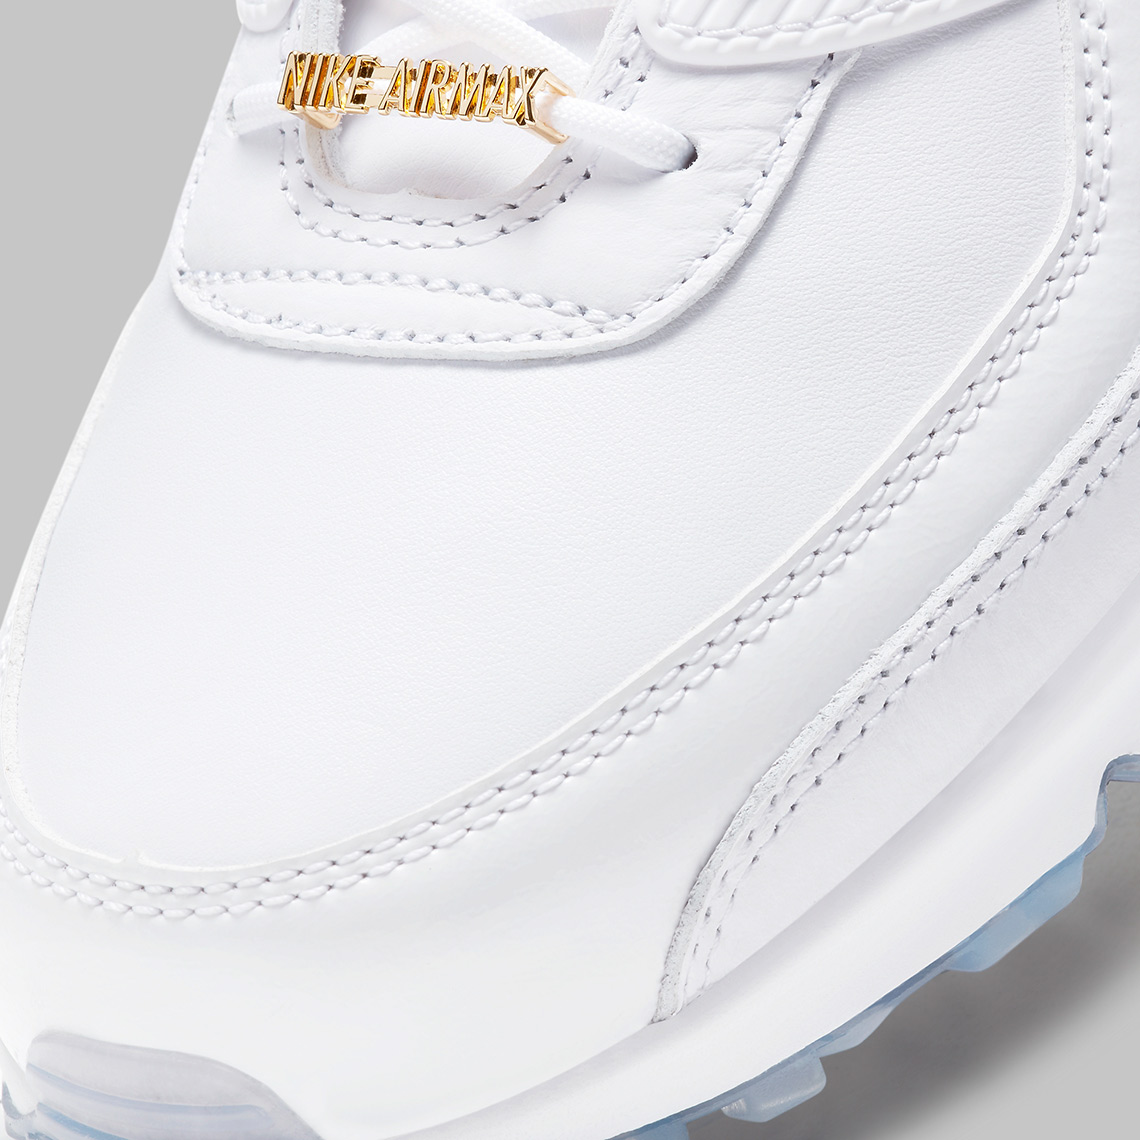 nike uptempo nike uptempo air max court 2 low cost comparison Pirate Radio White Gold Cw4070 100 6